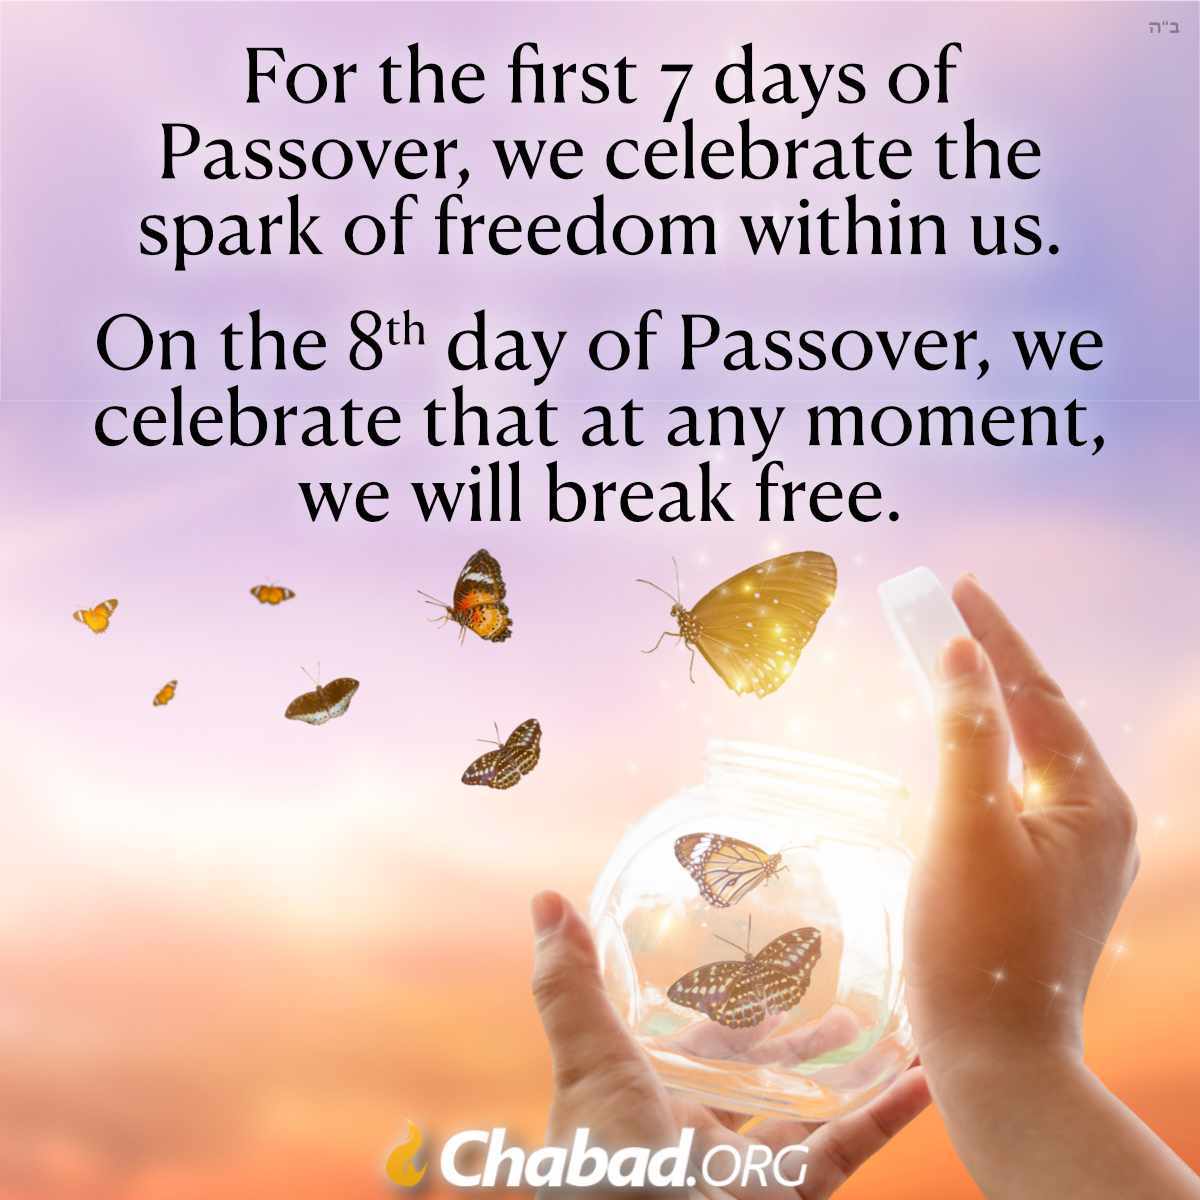 For the first seven days of Passover, we celebrate the spark of freedom within us. On the eighth day, we celebrate that at any moment, we will break free.